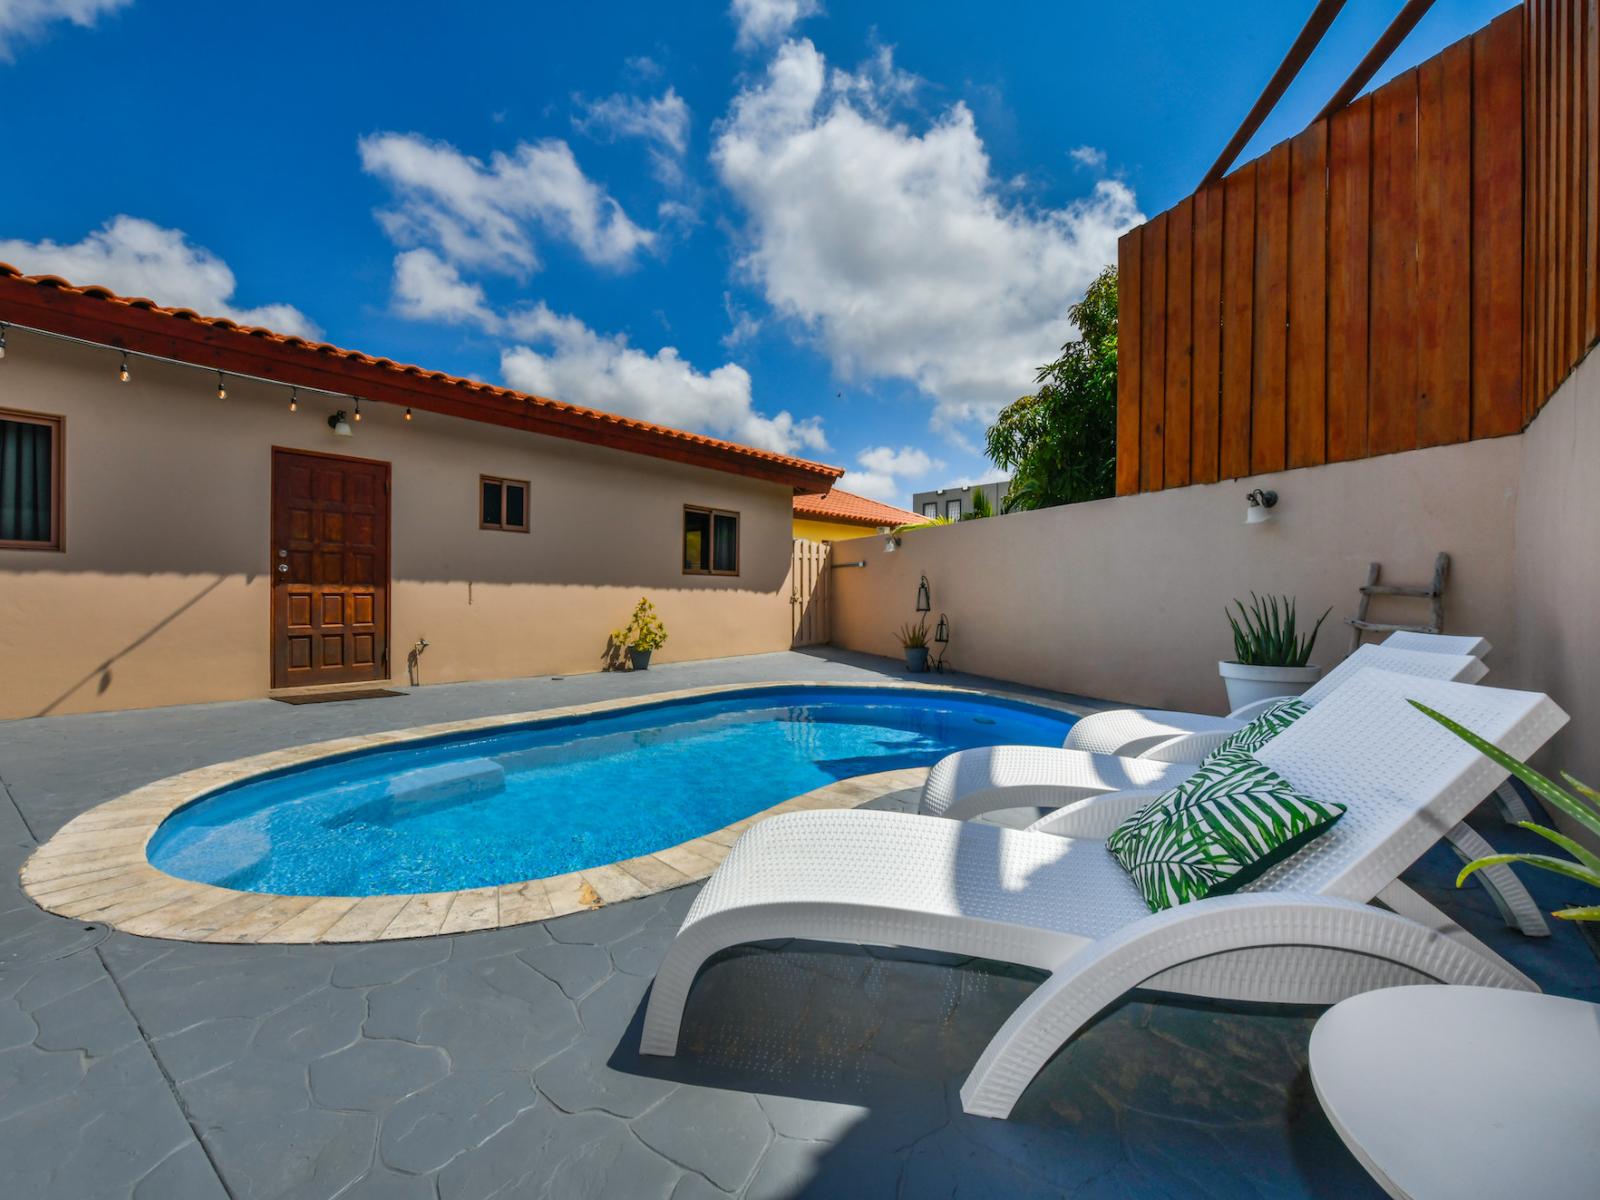 Private pool and outdoor kitchen- enjoy the outdoors even more! swim, dine out and relax.